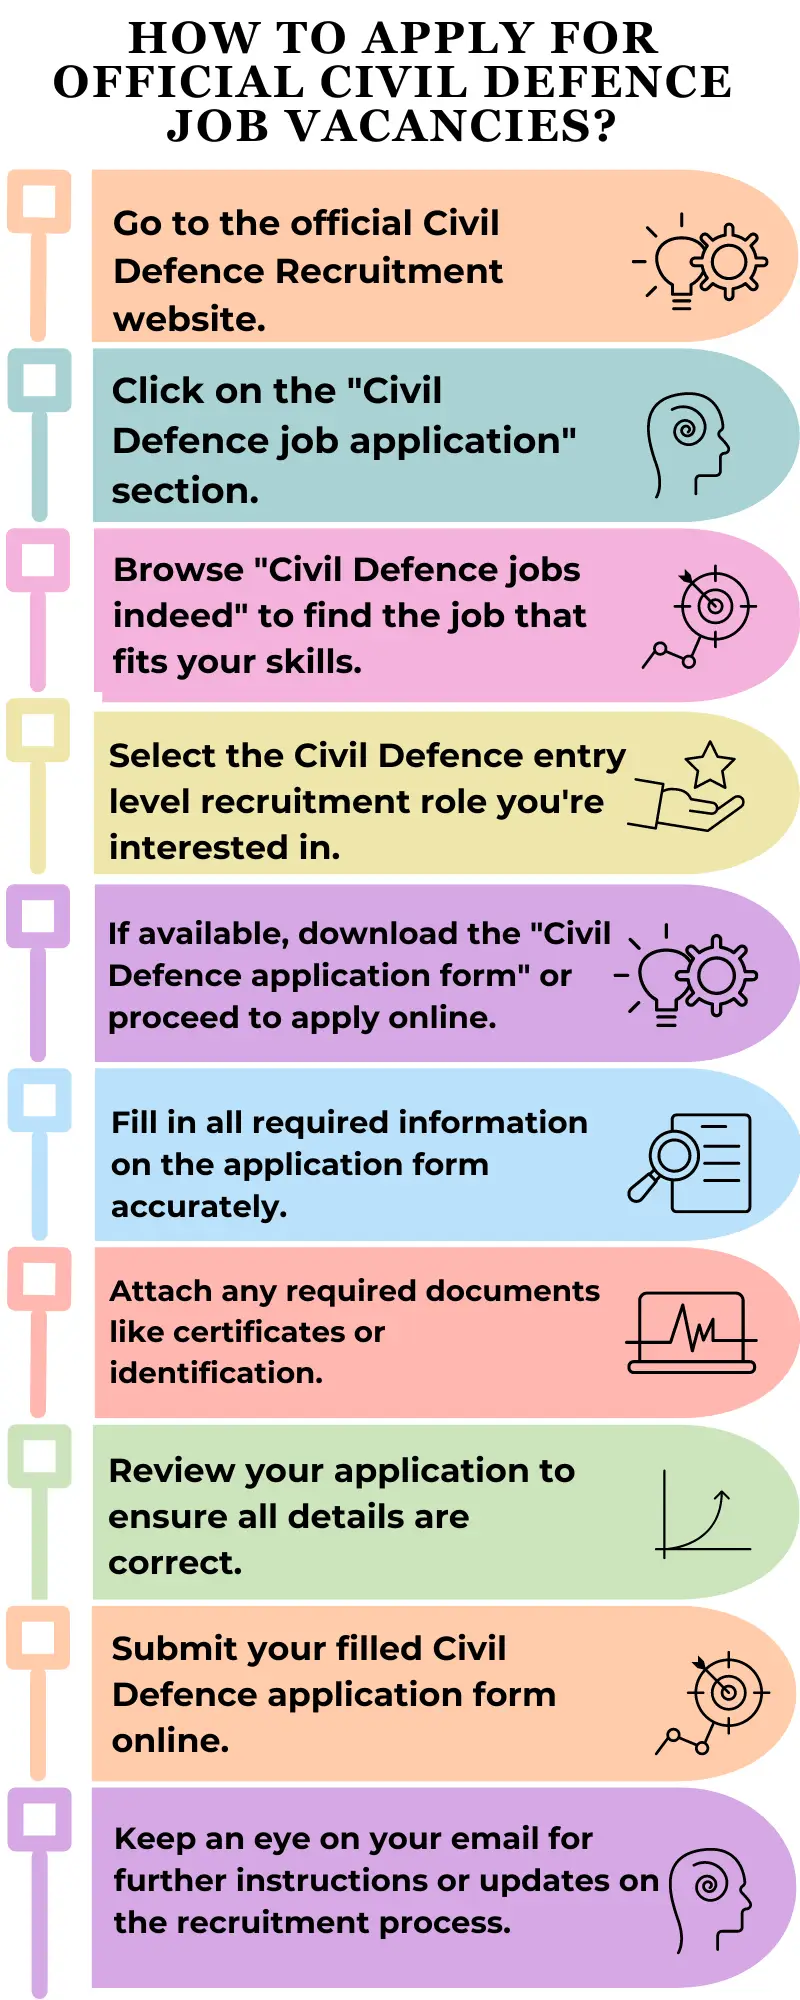 How to Apply for official Civil Defence Job Vacancies?